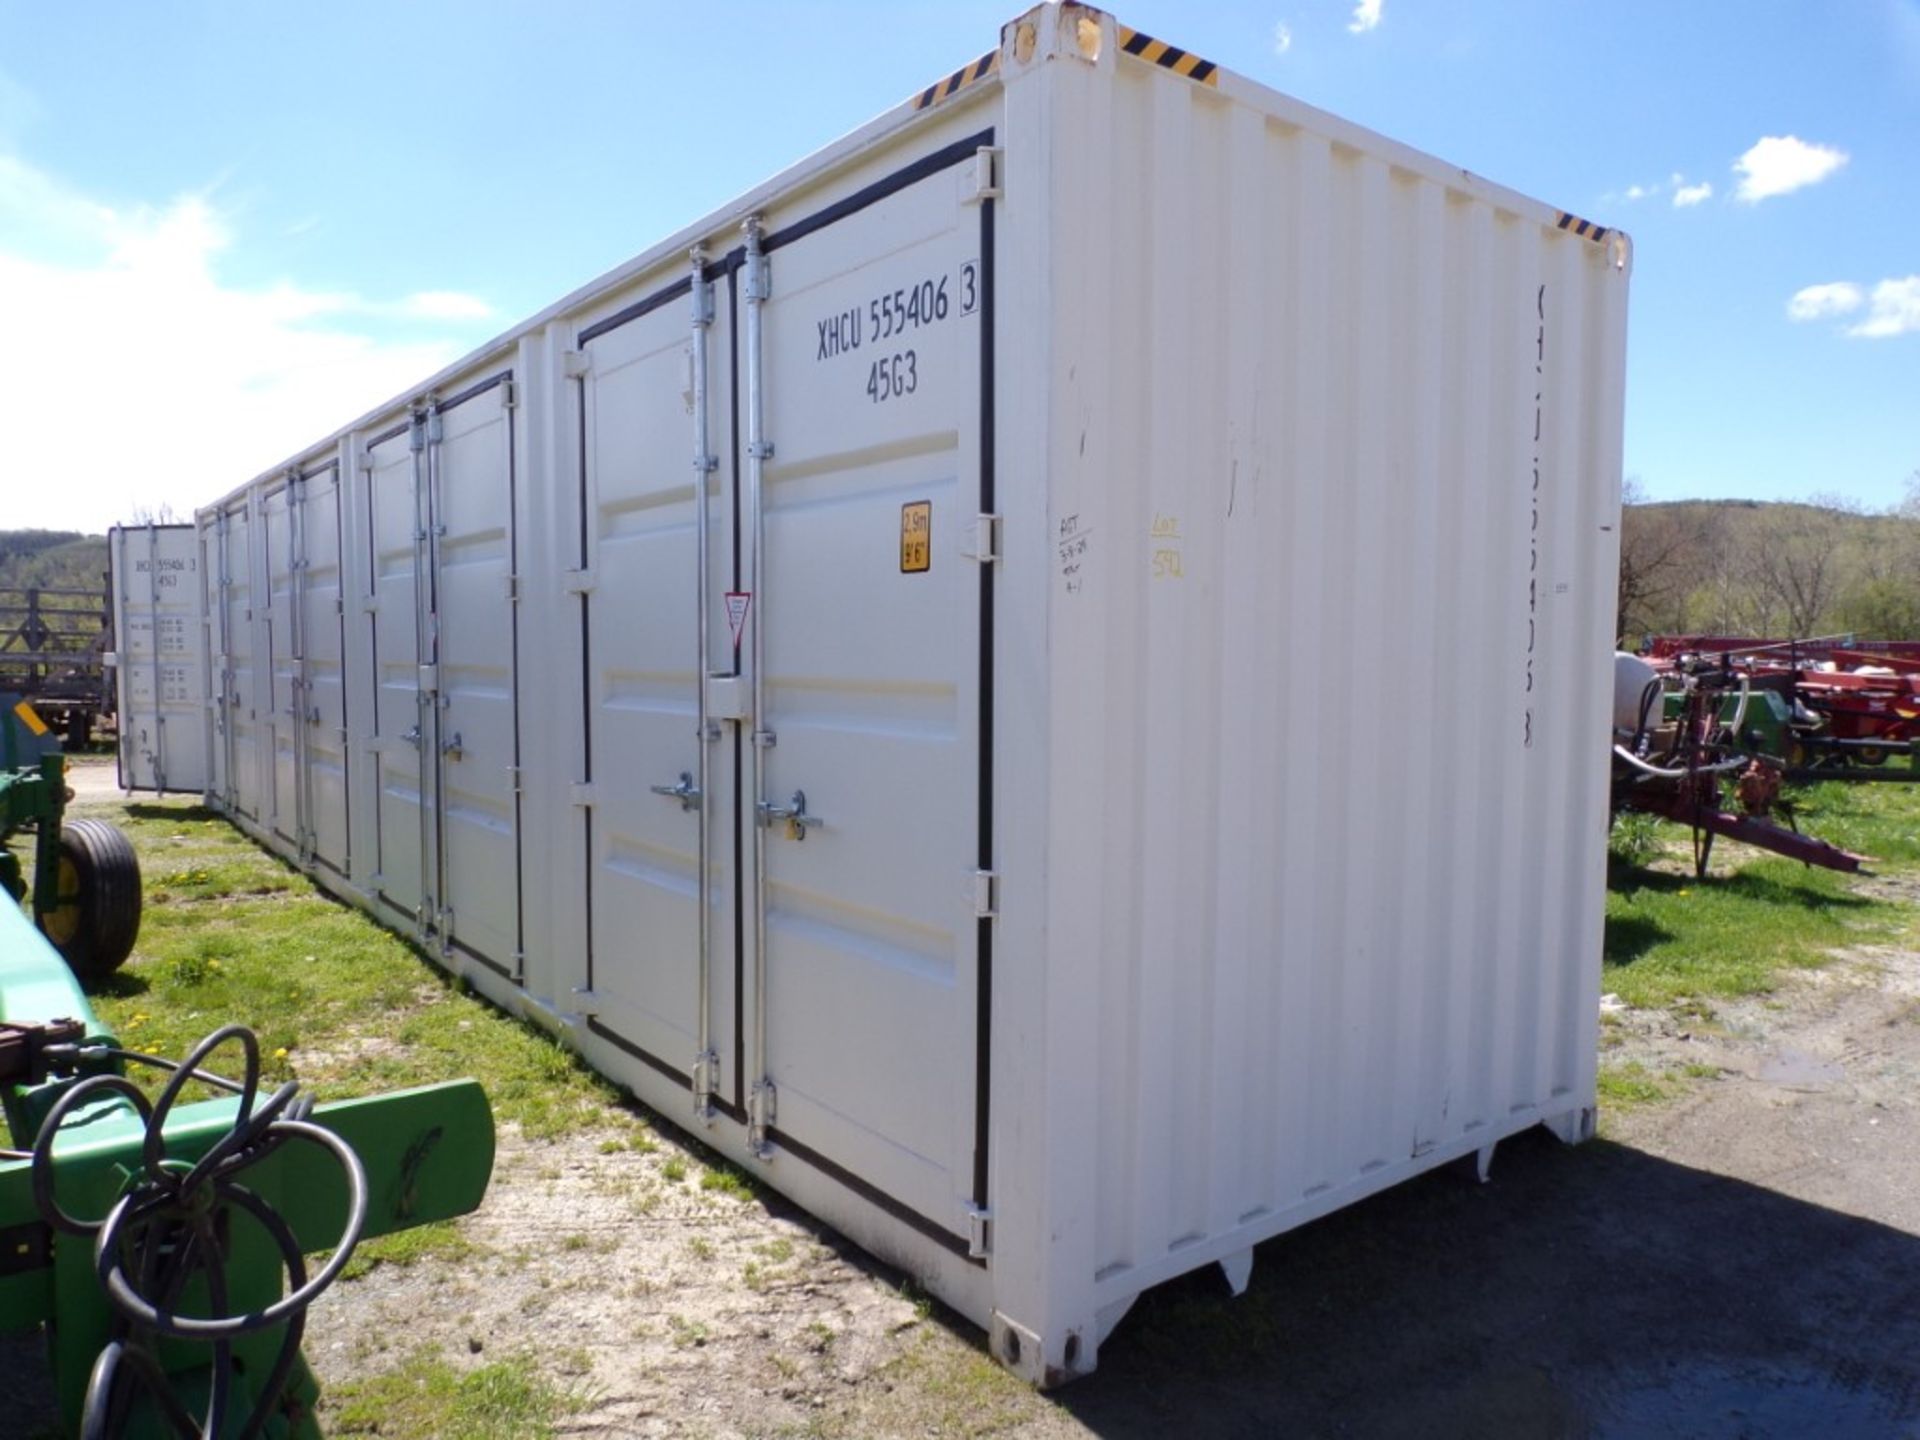 New 40' Shipping/Storage Container, 4 Side Entrance Doors, Barn Doors on Rear, Cont. # - Image 2 of 2